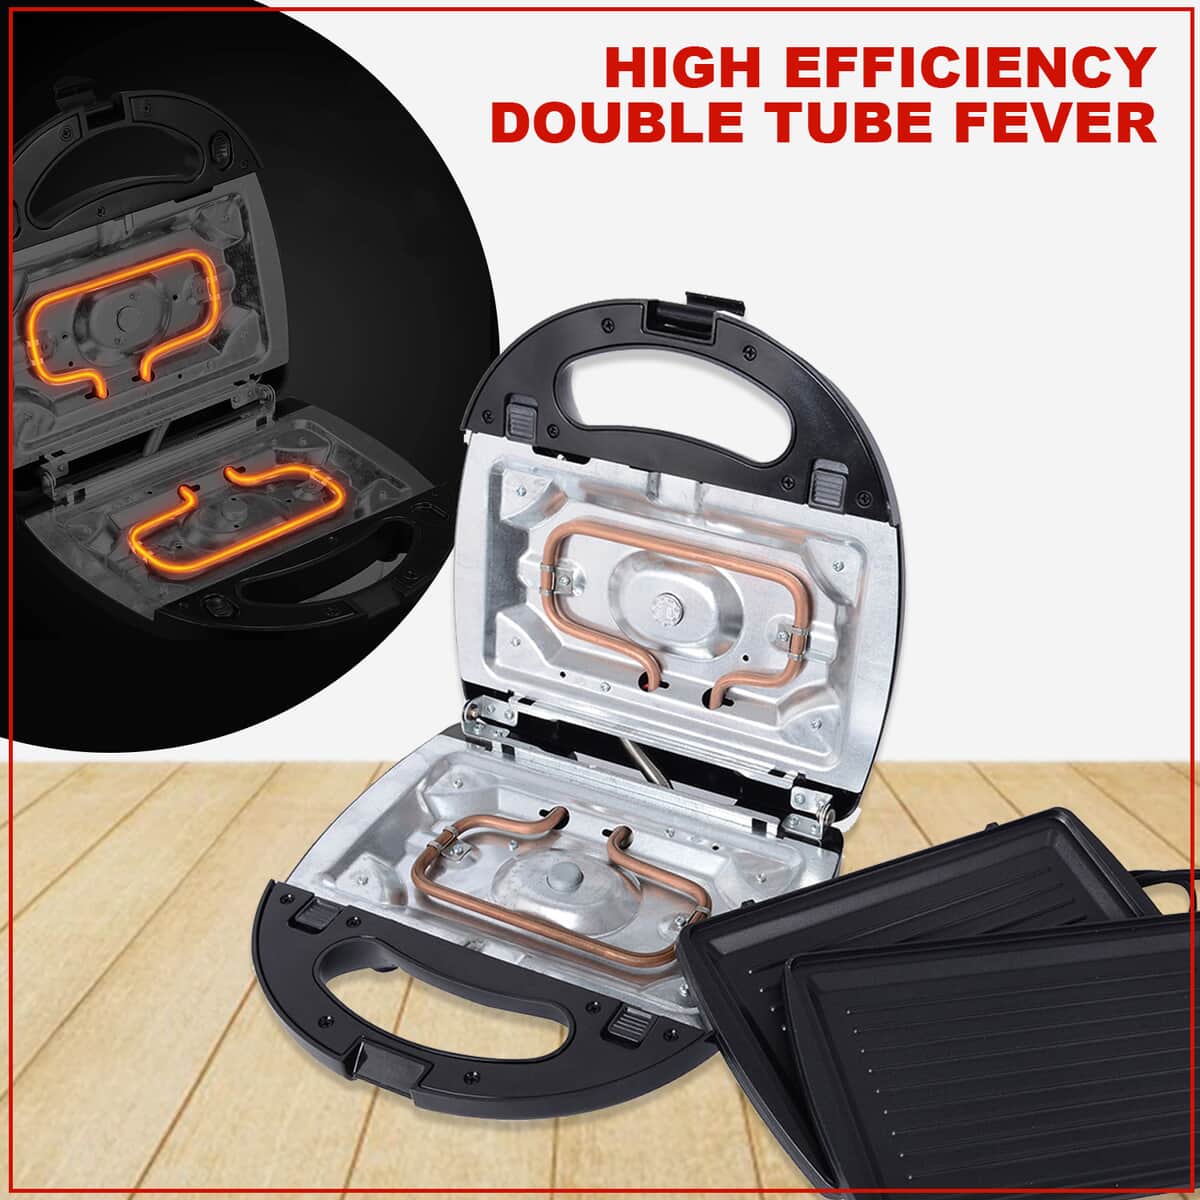 Black & Gray Sandwich Maker with 4 sets of Detachable Heating Plates image number 3